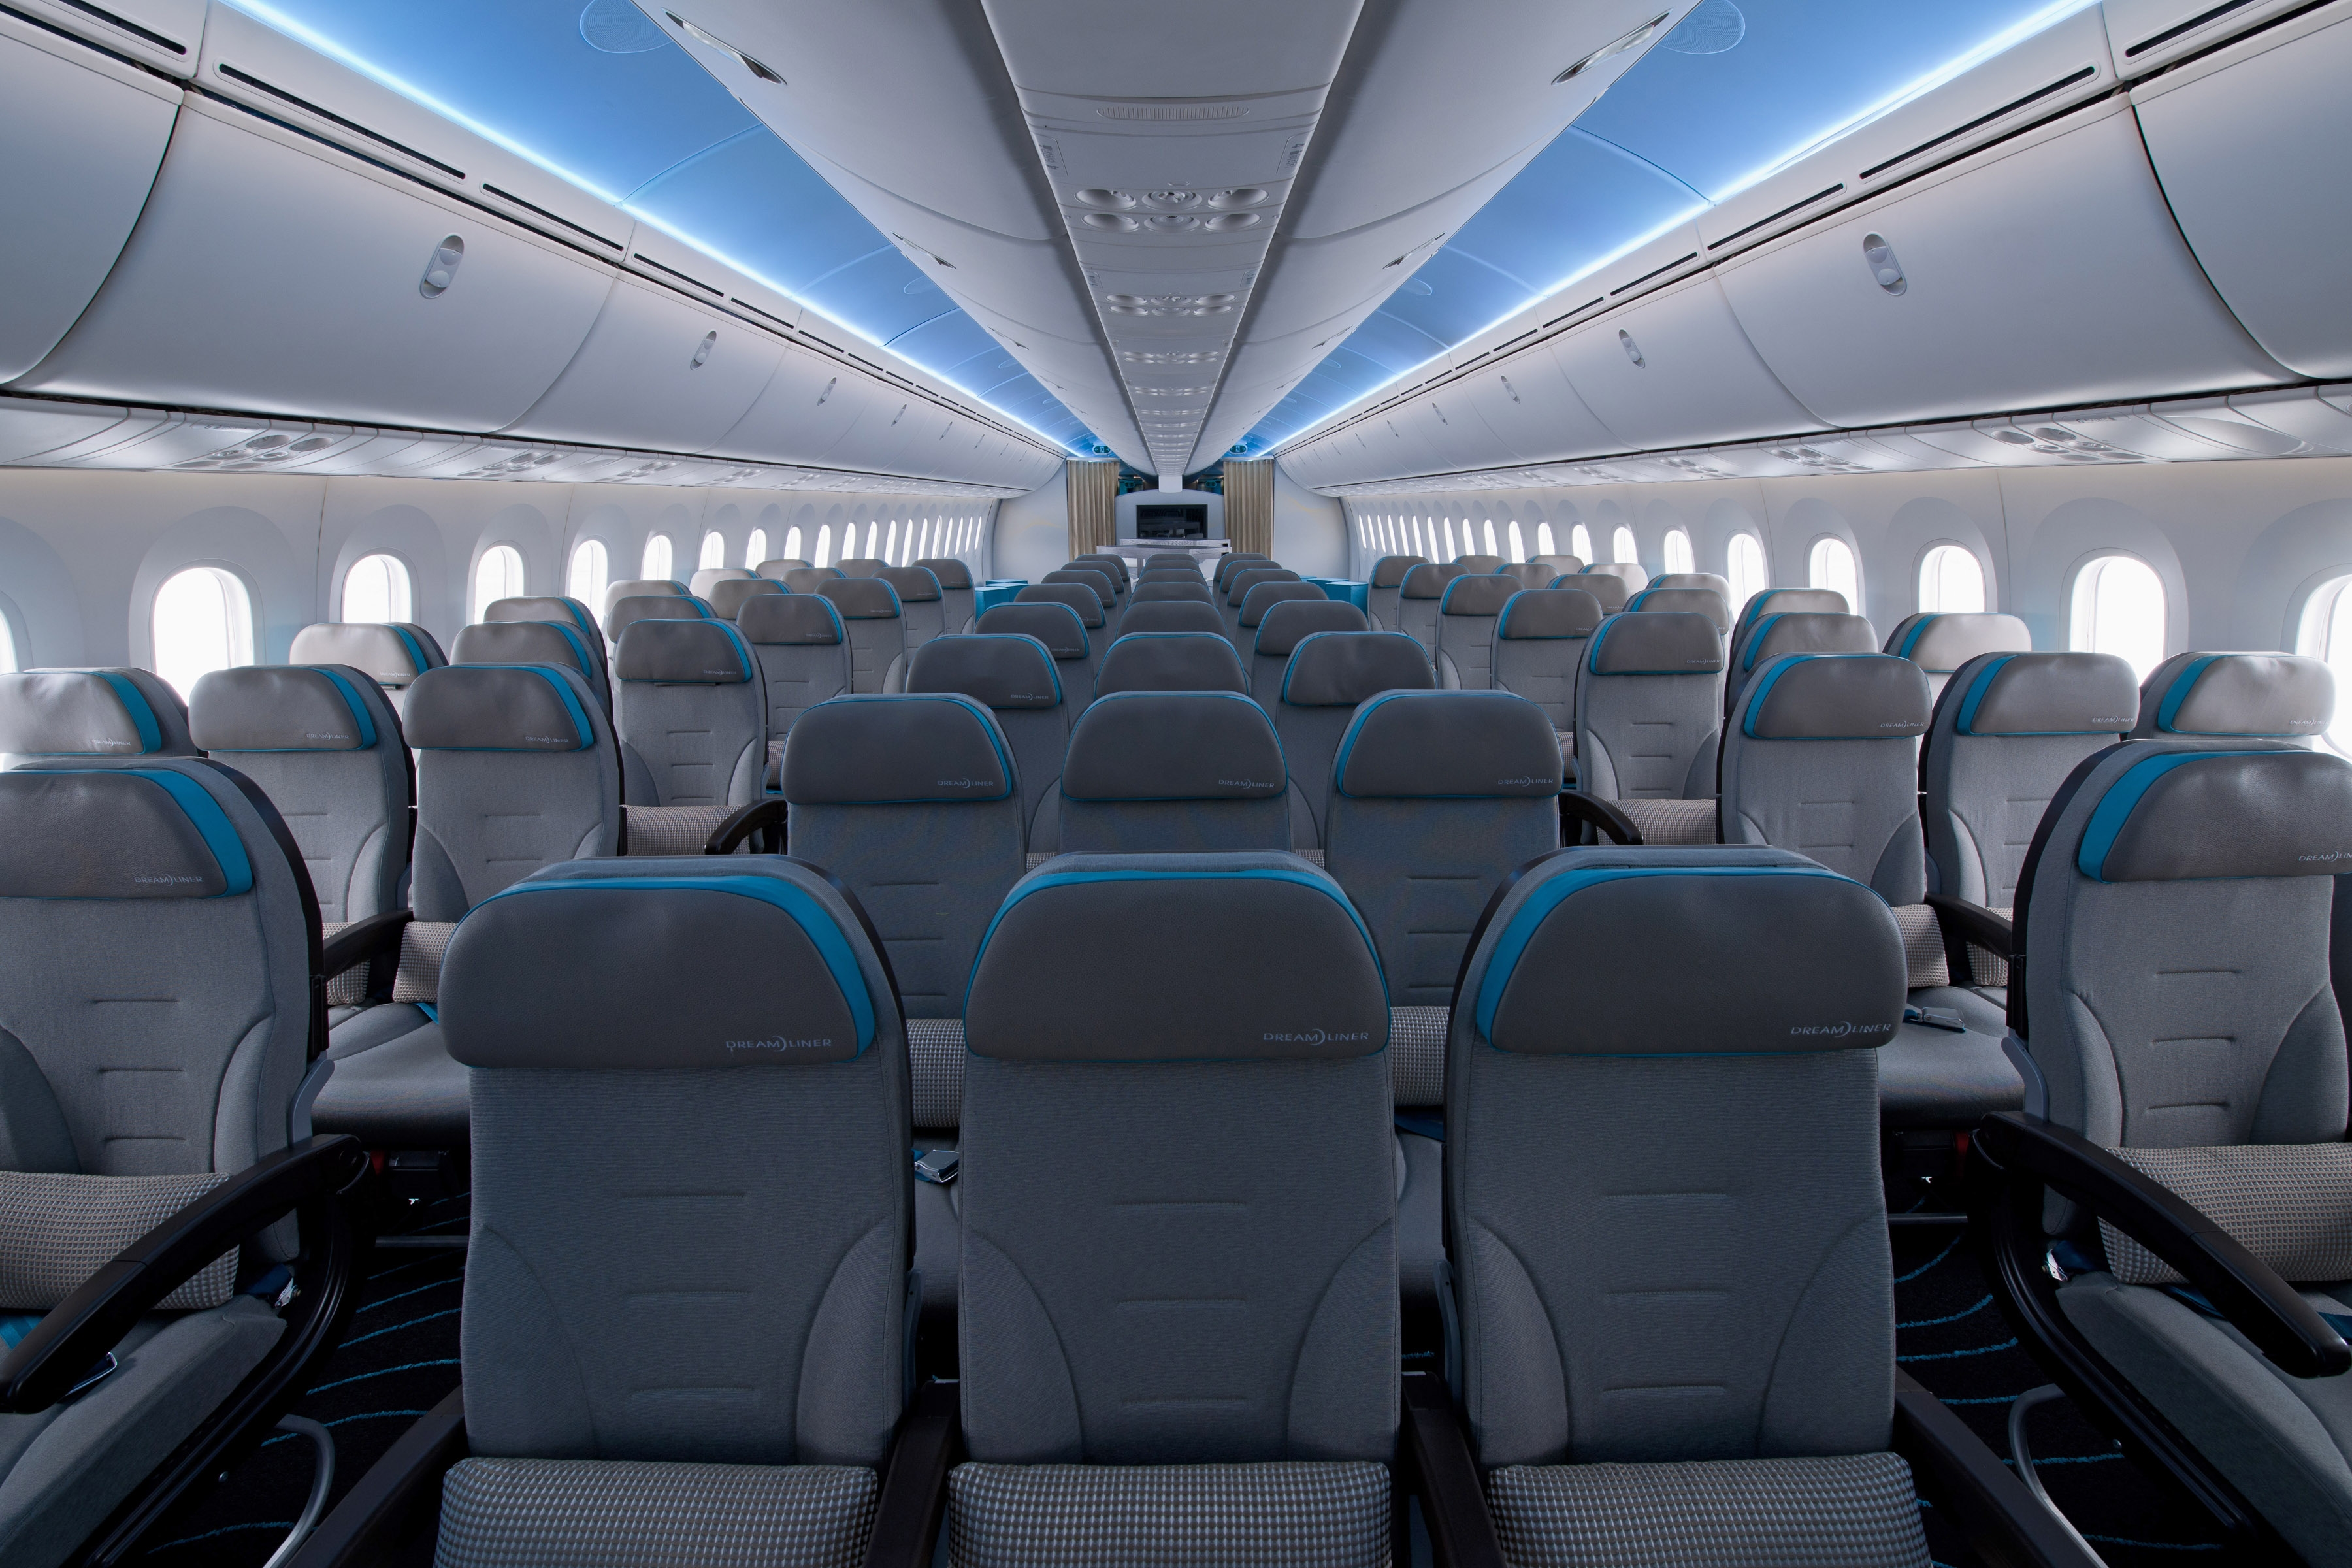 An Inside Look at the Third 787 Dreamliner's New Interior